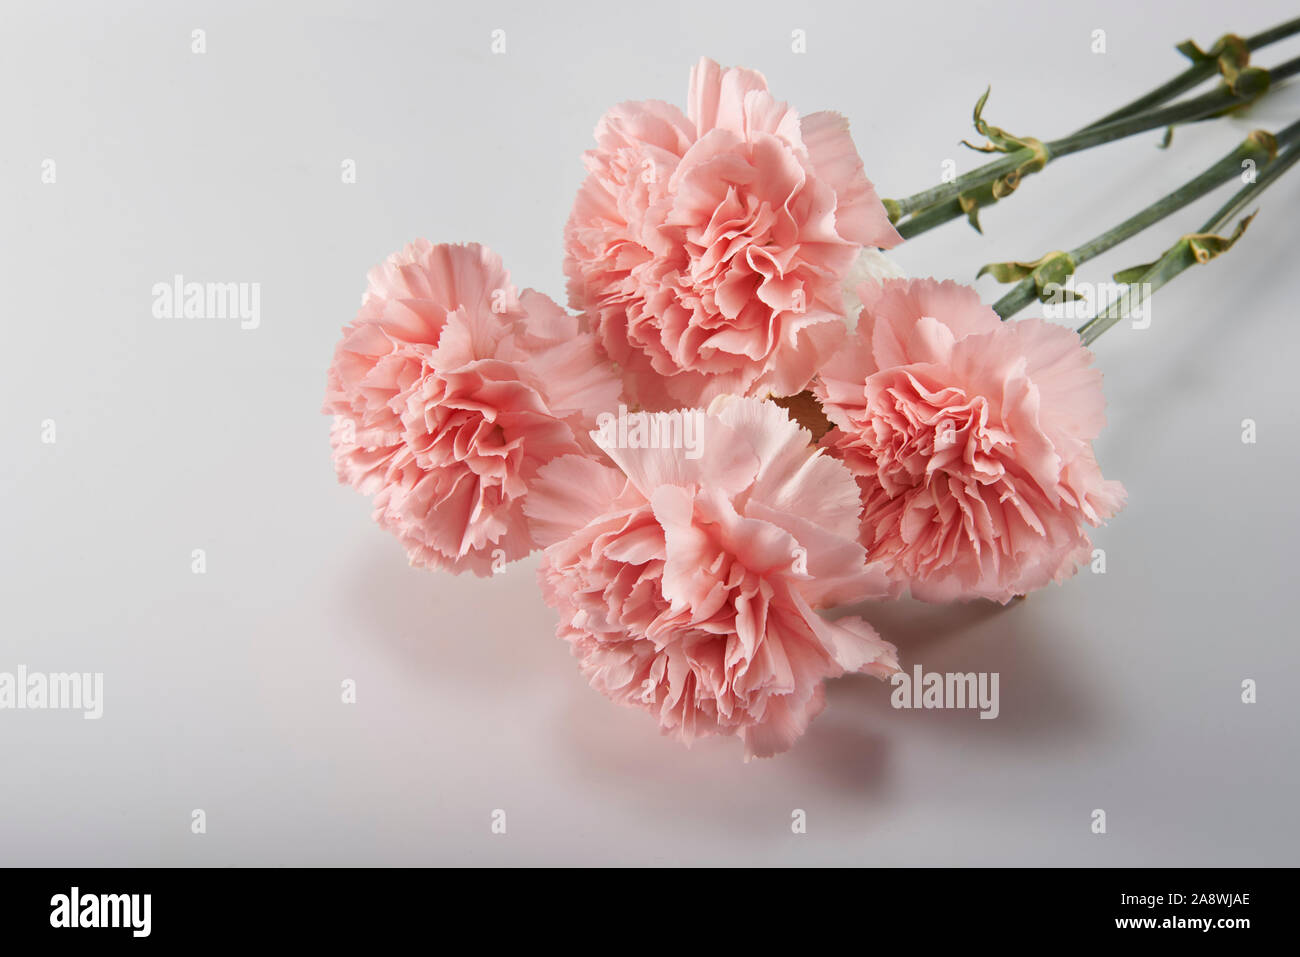 Blooming Carnation Stock Photo